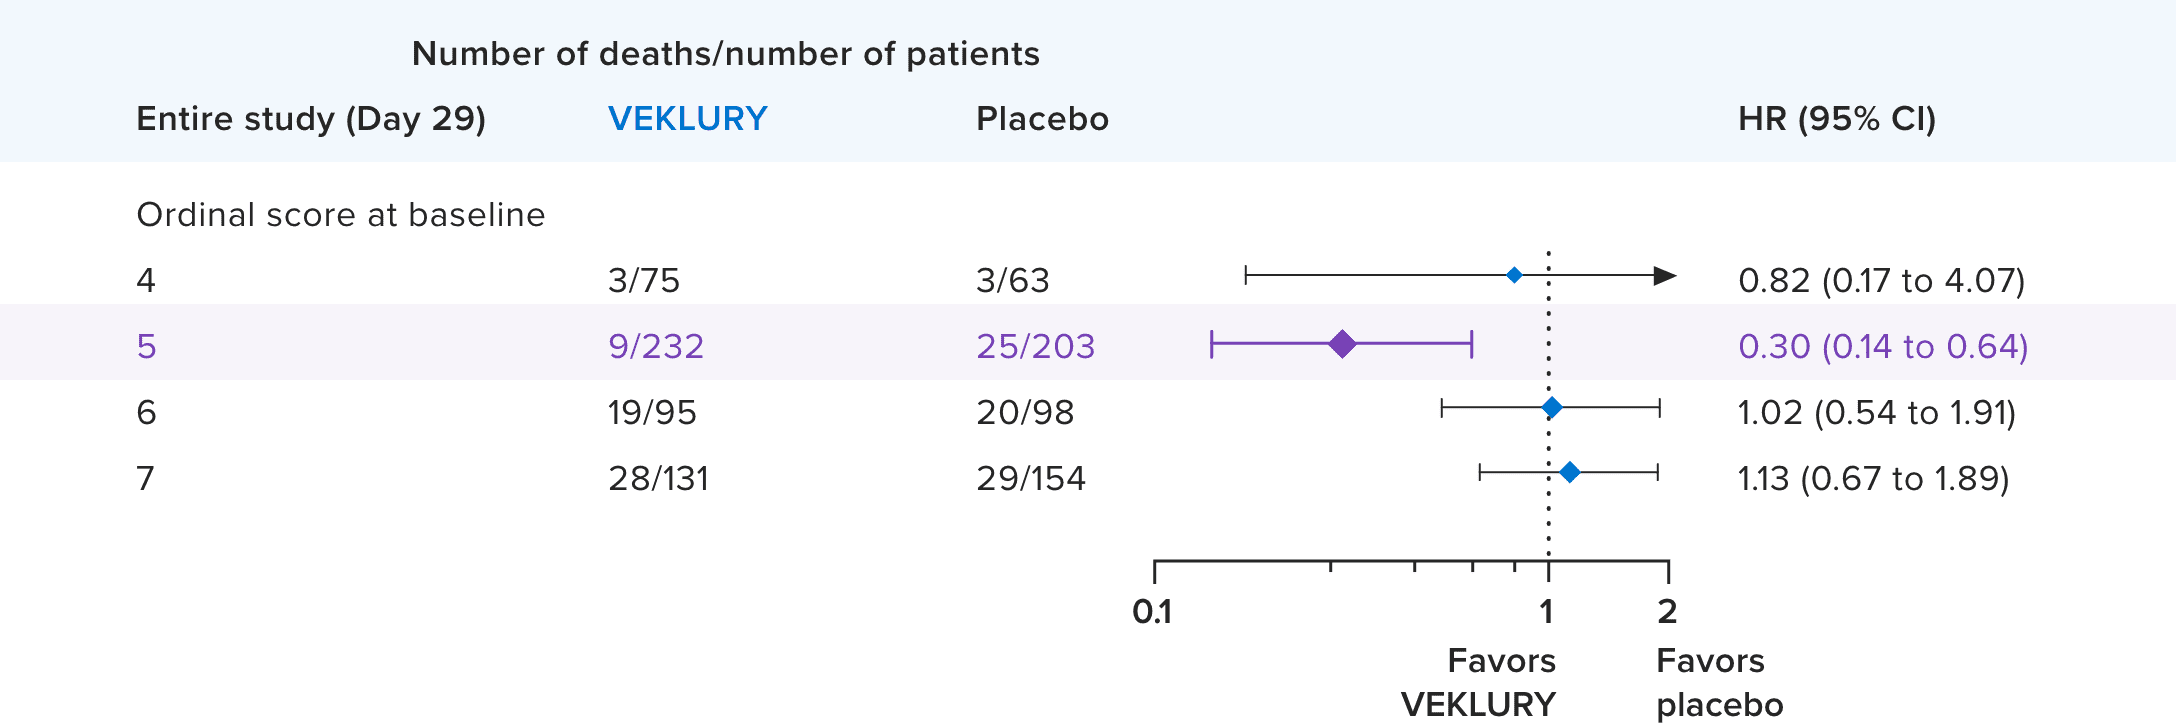 ACTT-1 Study data showing the number of patients and deaths